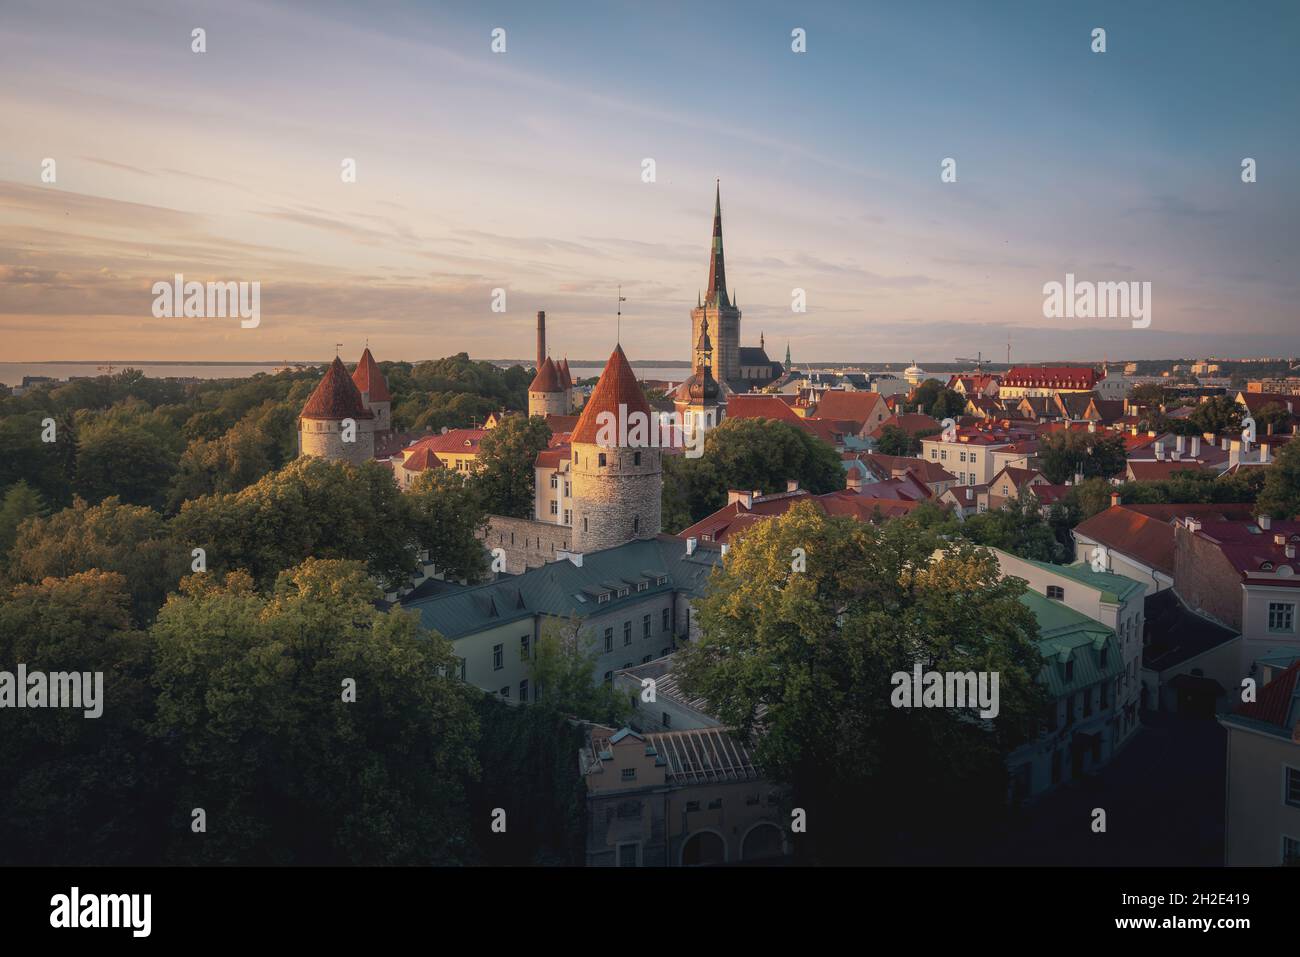 Aerial view of Tallinn at sunset with many towers of Tallinn City Wall and St Olaf Church Tower - Tallinn, Estonia Stock Photo